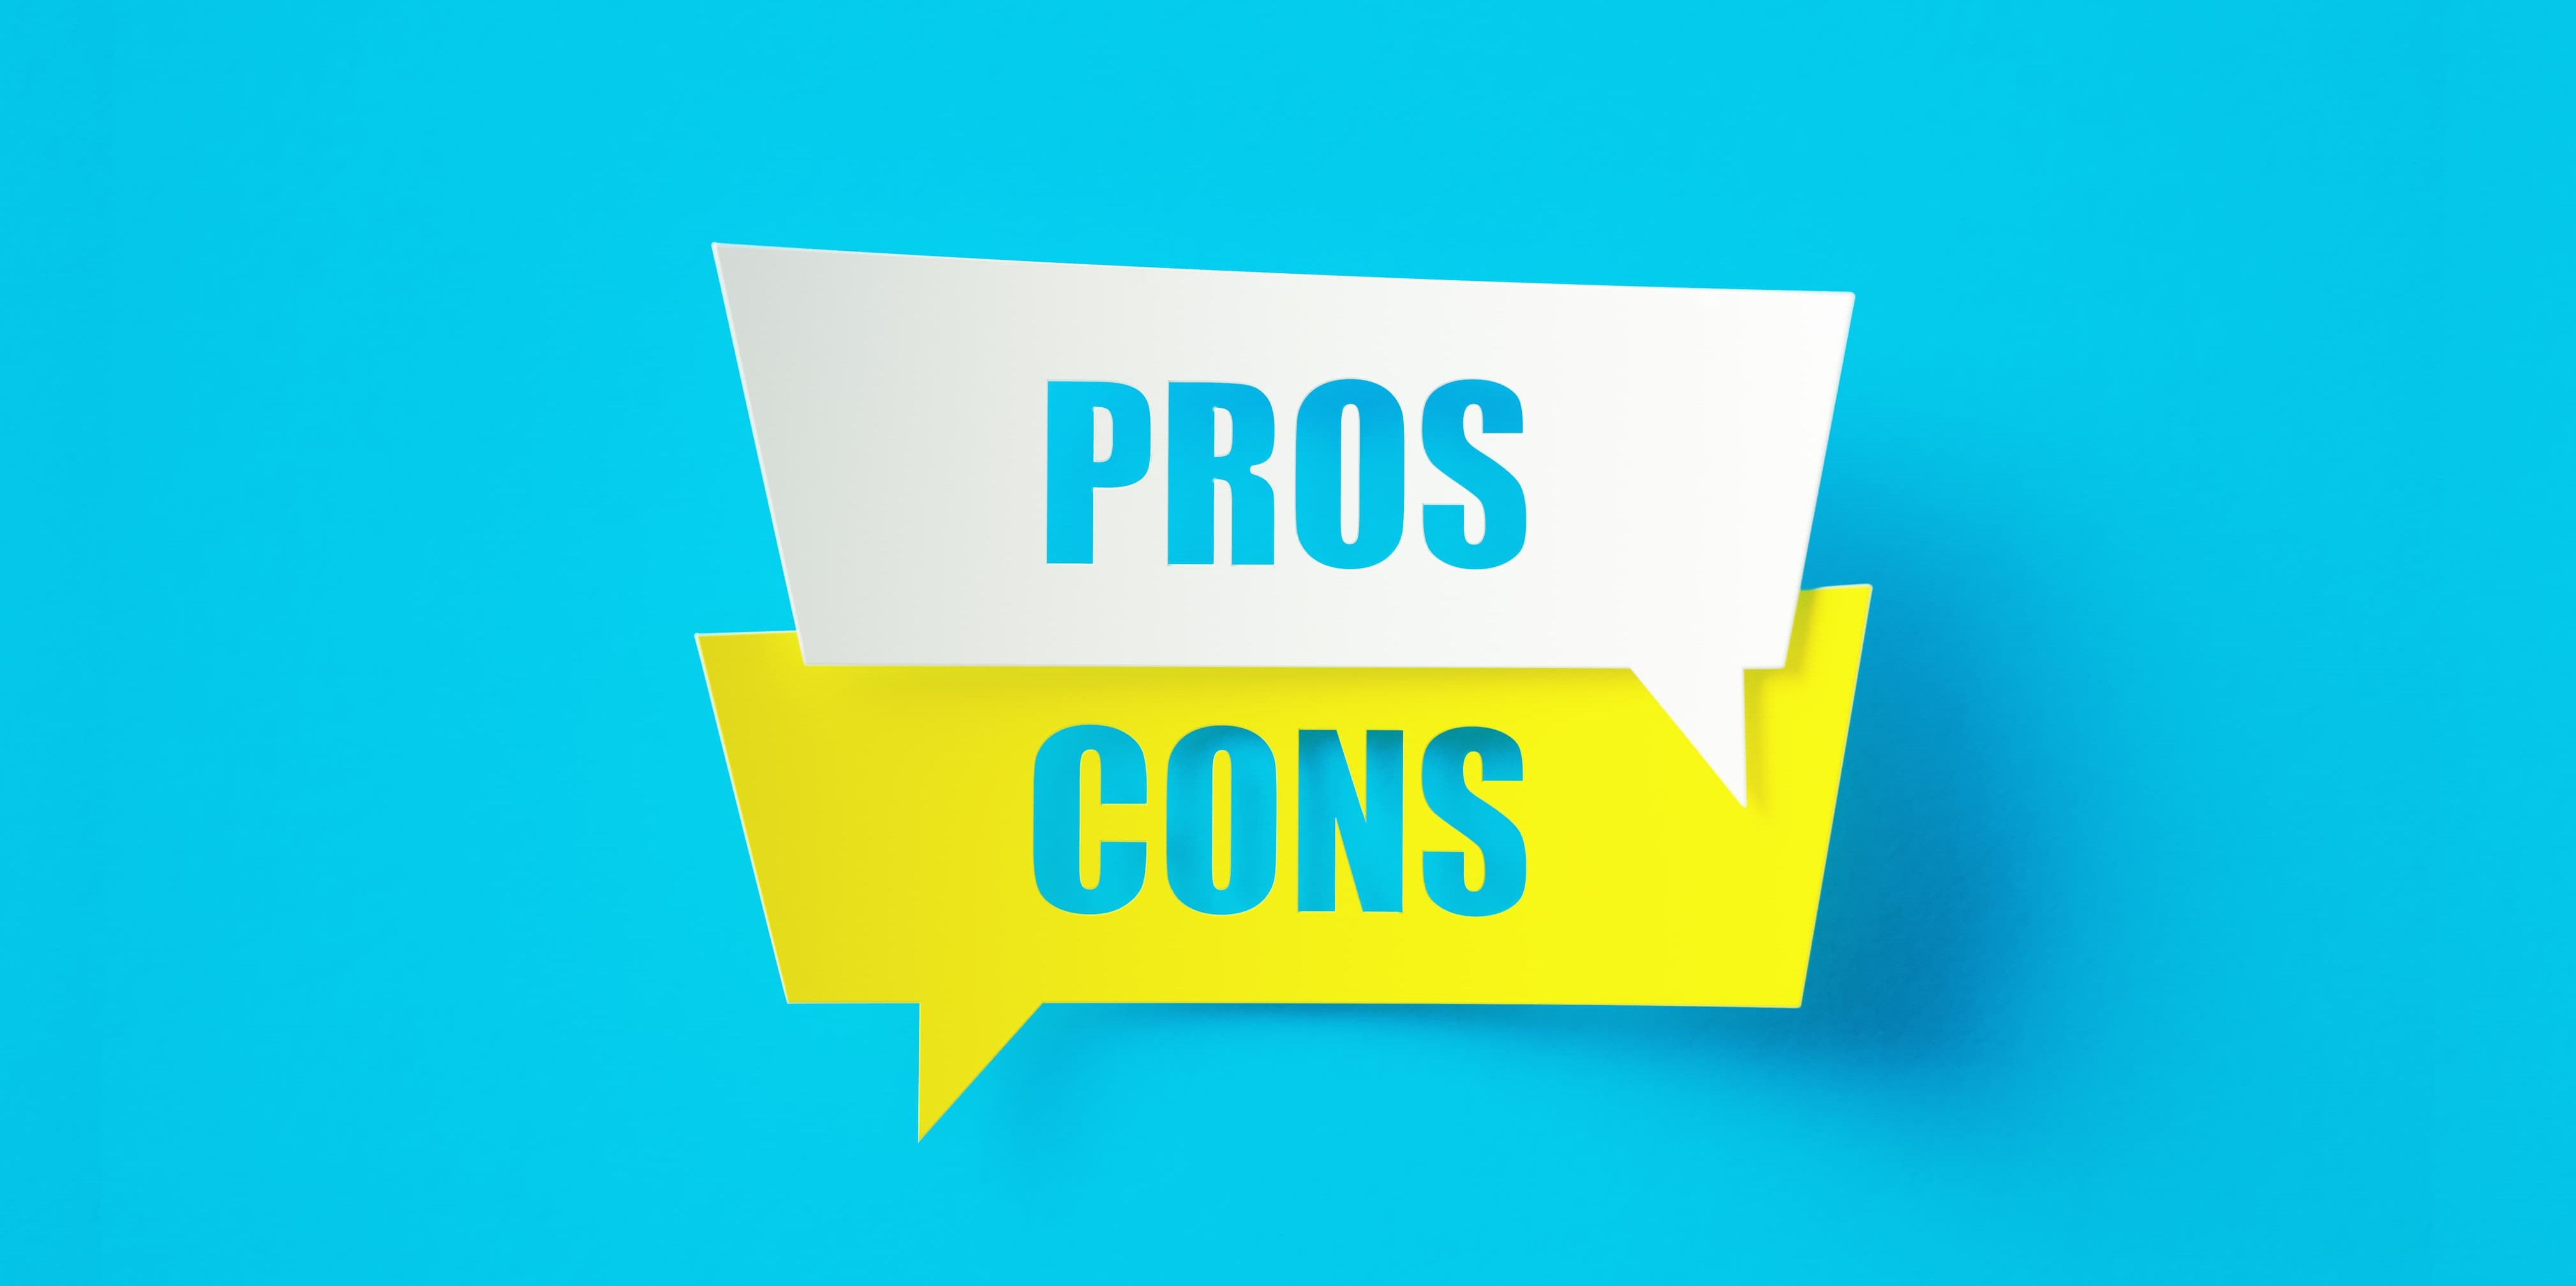 Pros and cons in white and yellow speech bubbles on a blue background